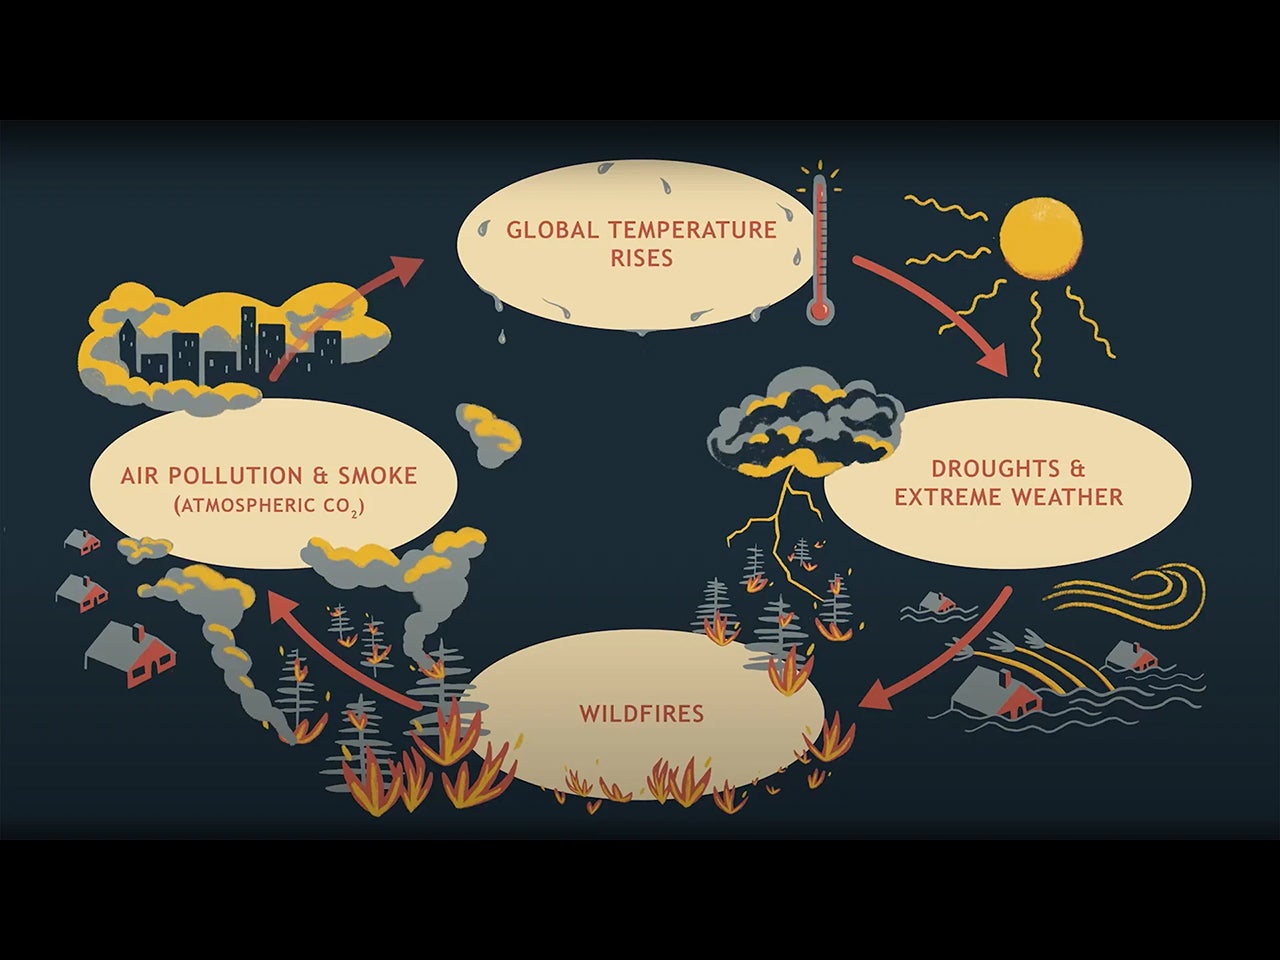 A graphic showing the positive feedback cycle: “Global temperature rises,” “Droughts and extreme weather,” “Wildfires,” “Air pollution and smoke (atmospheric CO2)”